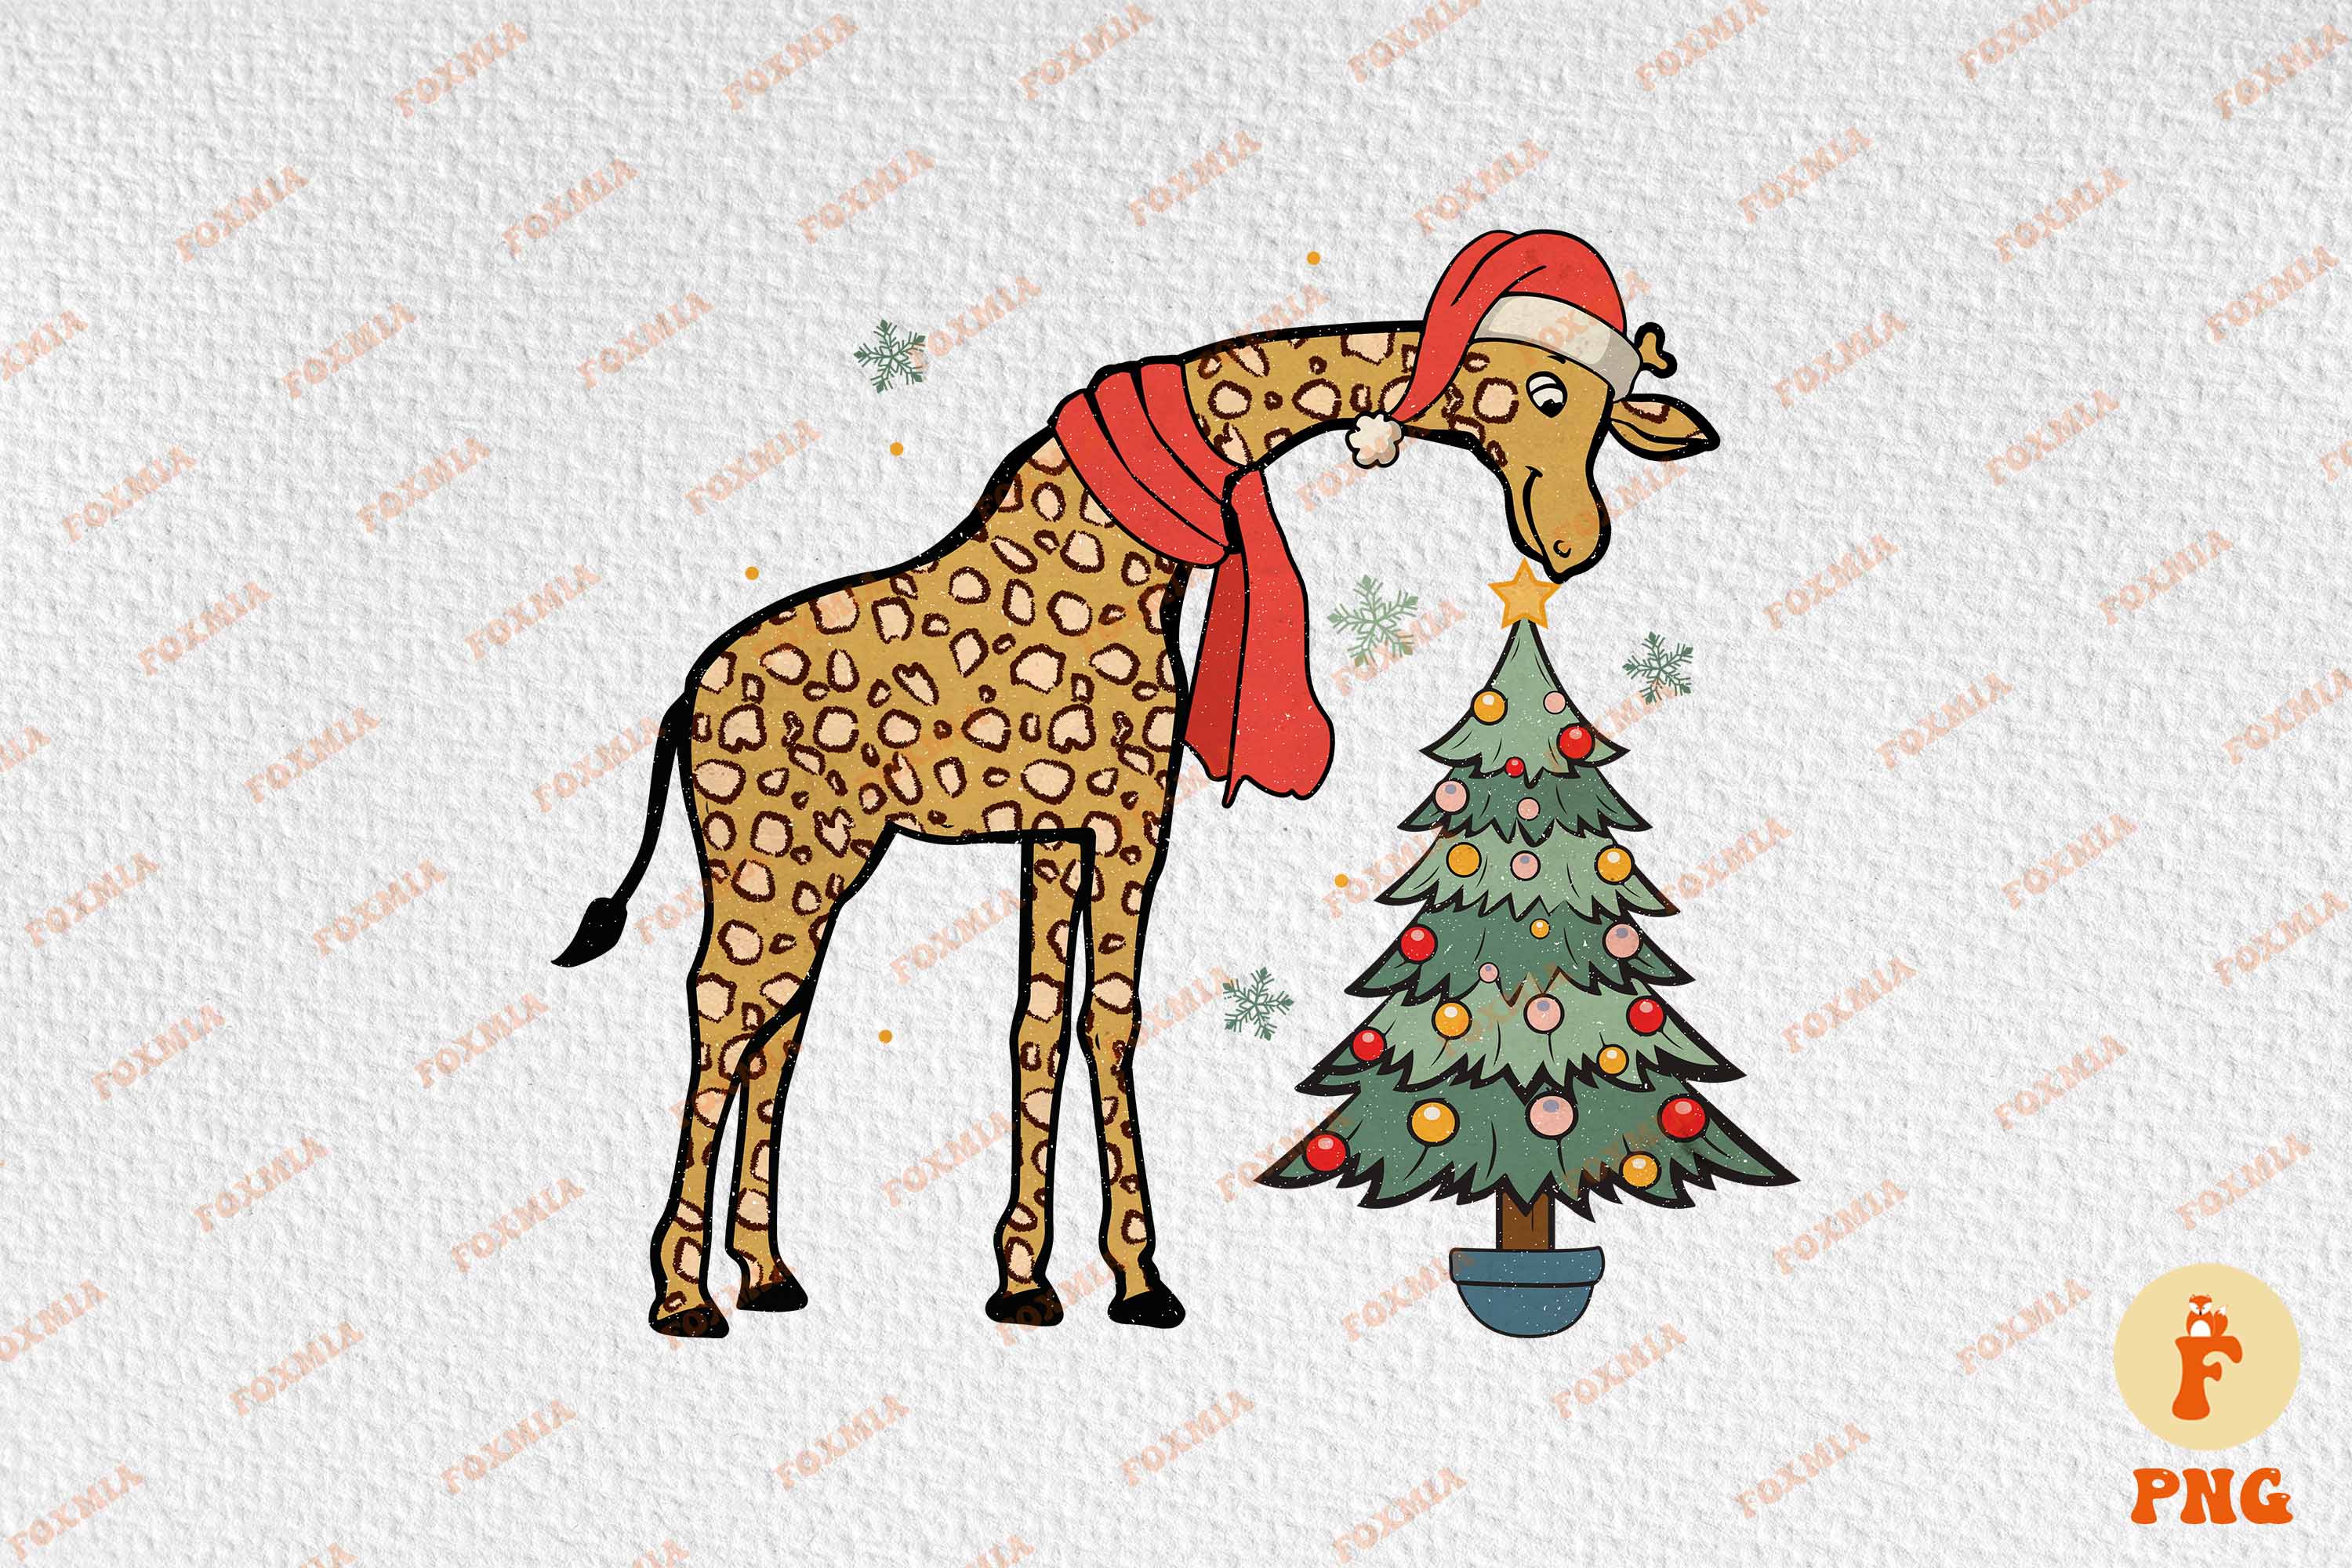 Gorgeous image with a giraffe near the New Year tree.